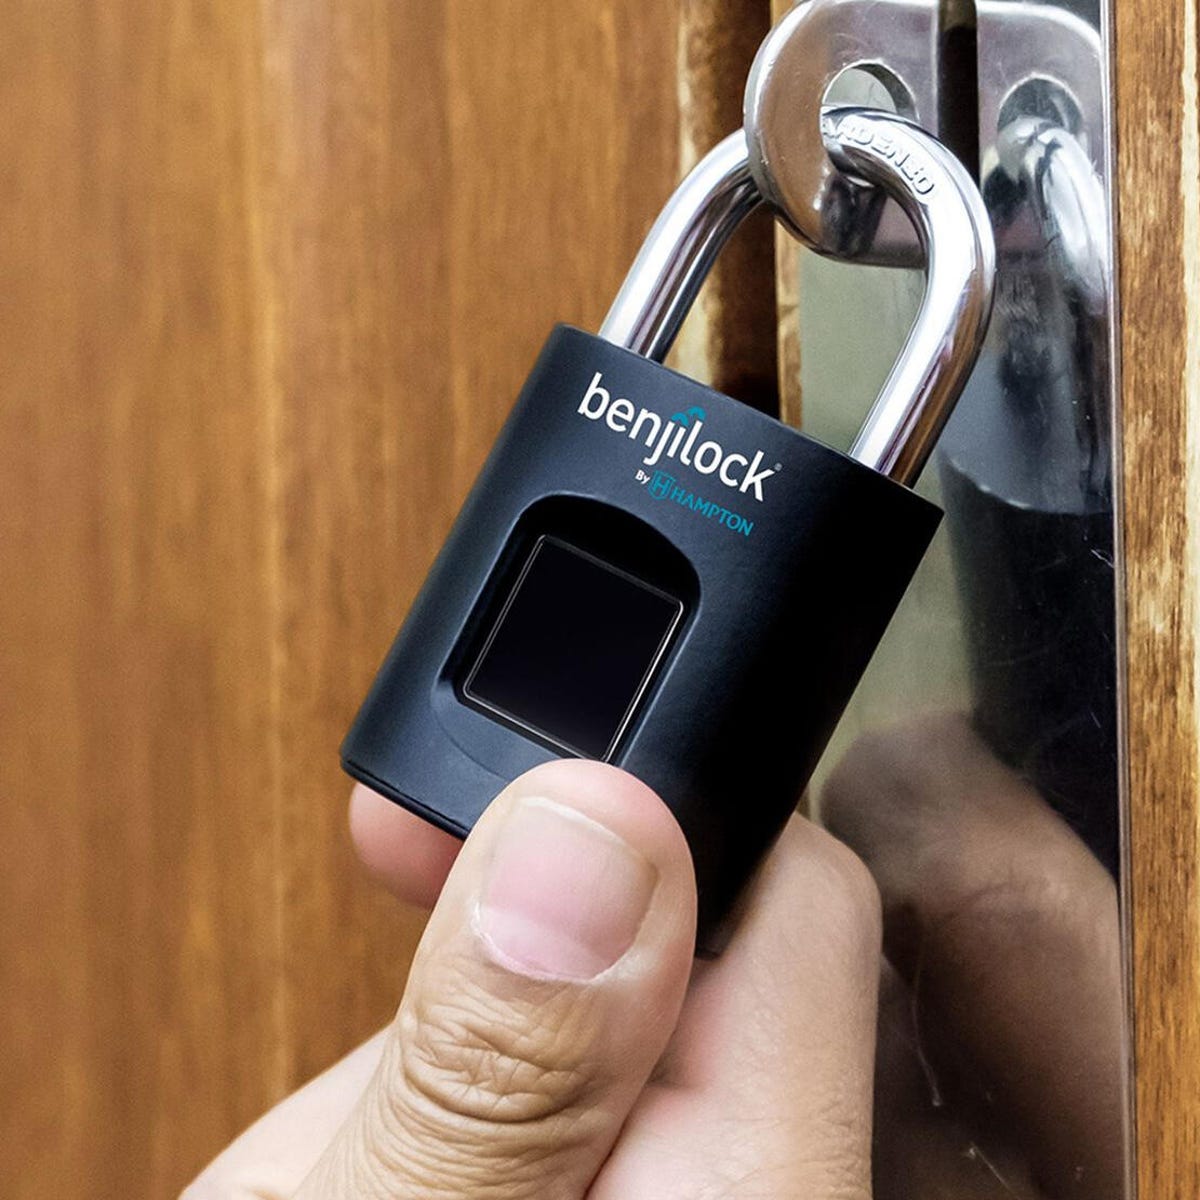 Save 15% on this smart padlock you unlock with your fingerprint (or a key)  - CNET